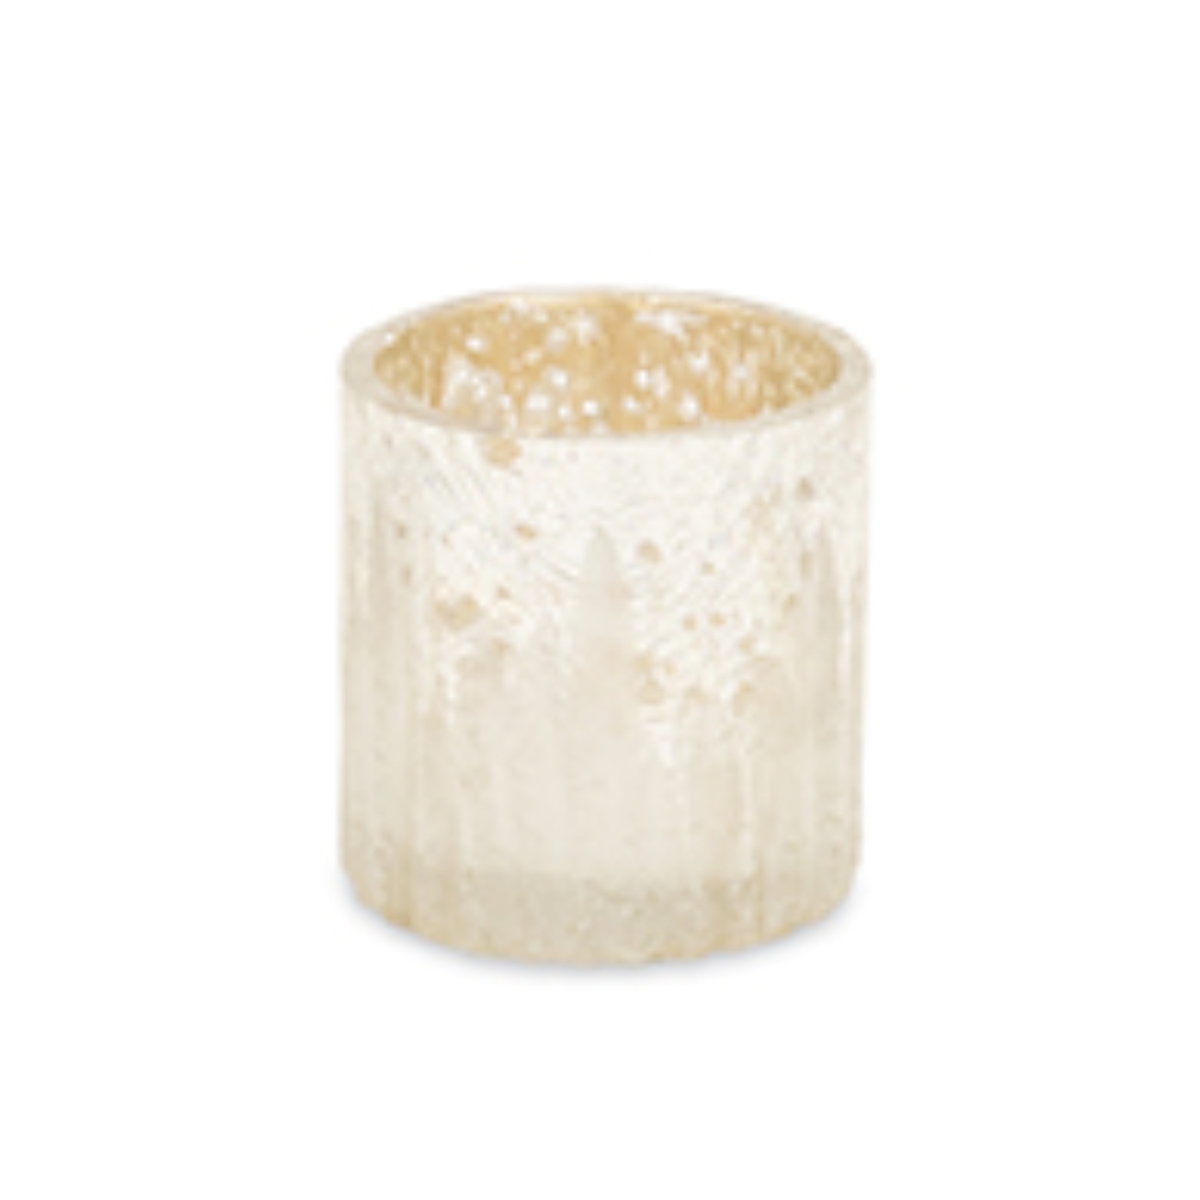 72086ds 2.75 X 2.75 In. Glass Votive Holder, Silver & White - Set Of 6